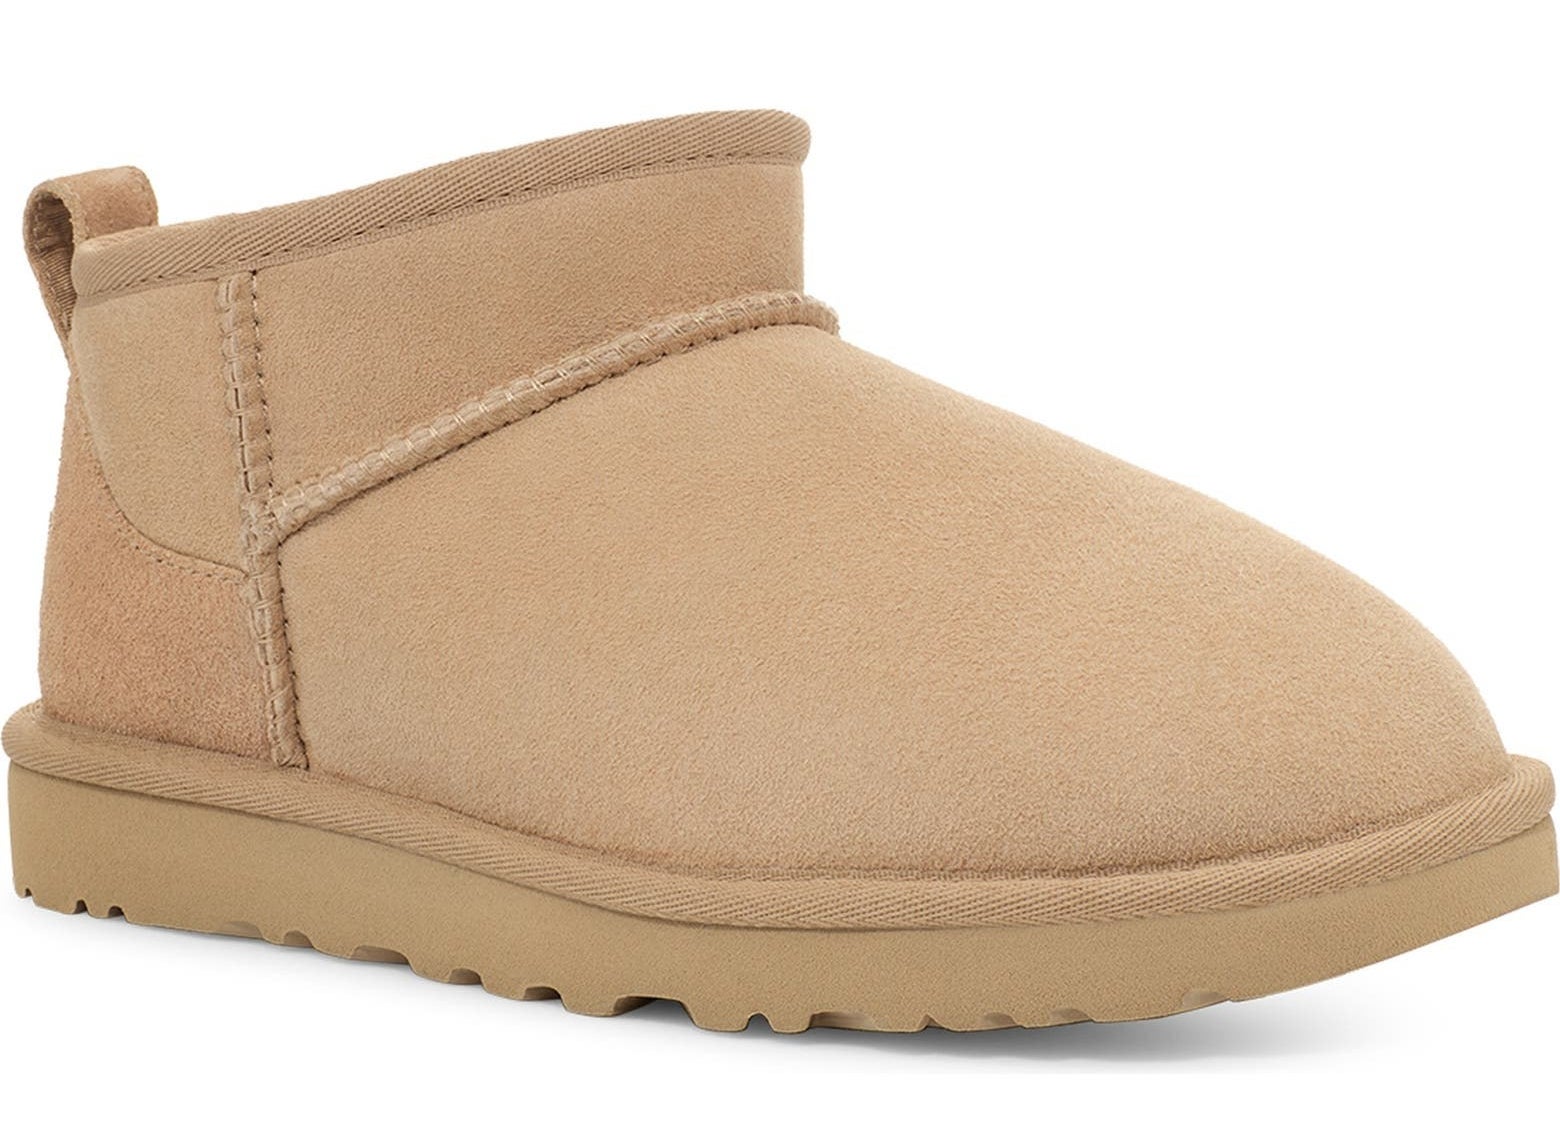 The uggs in camel